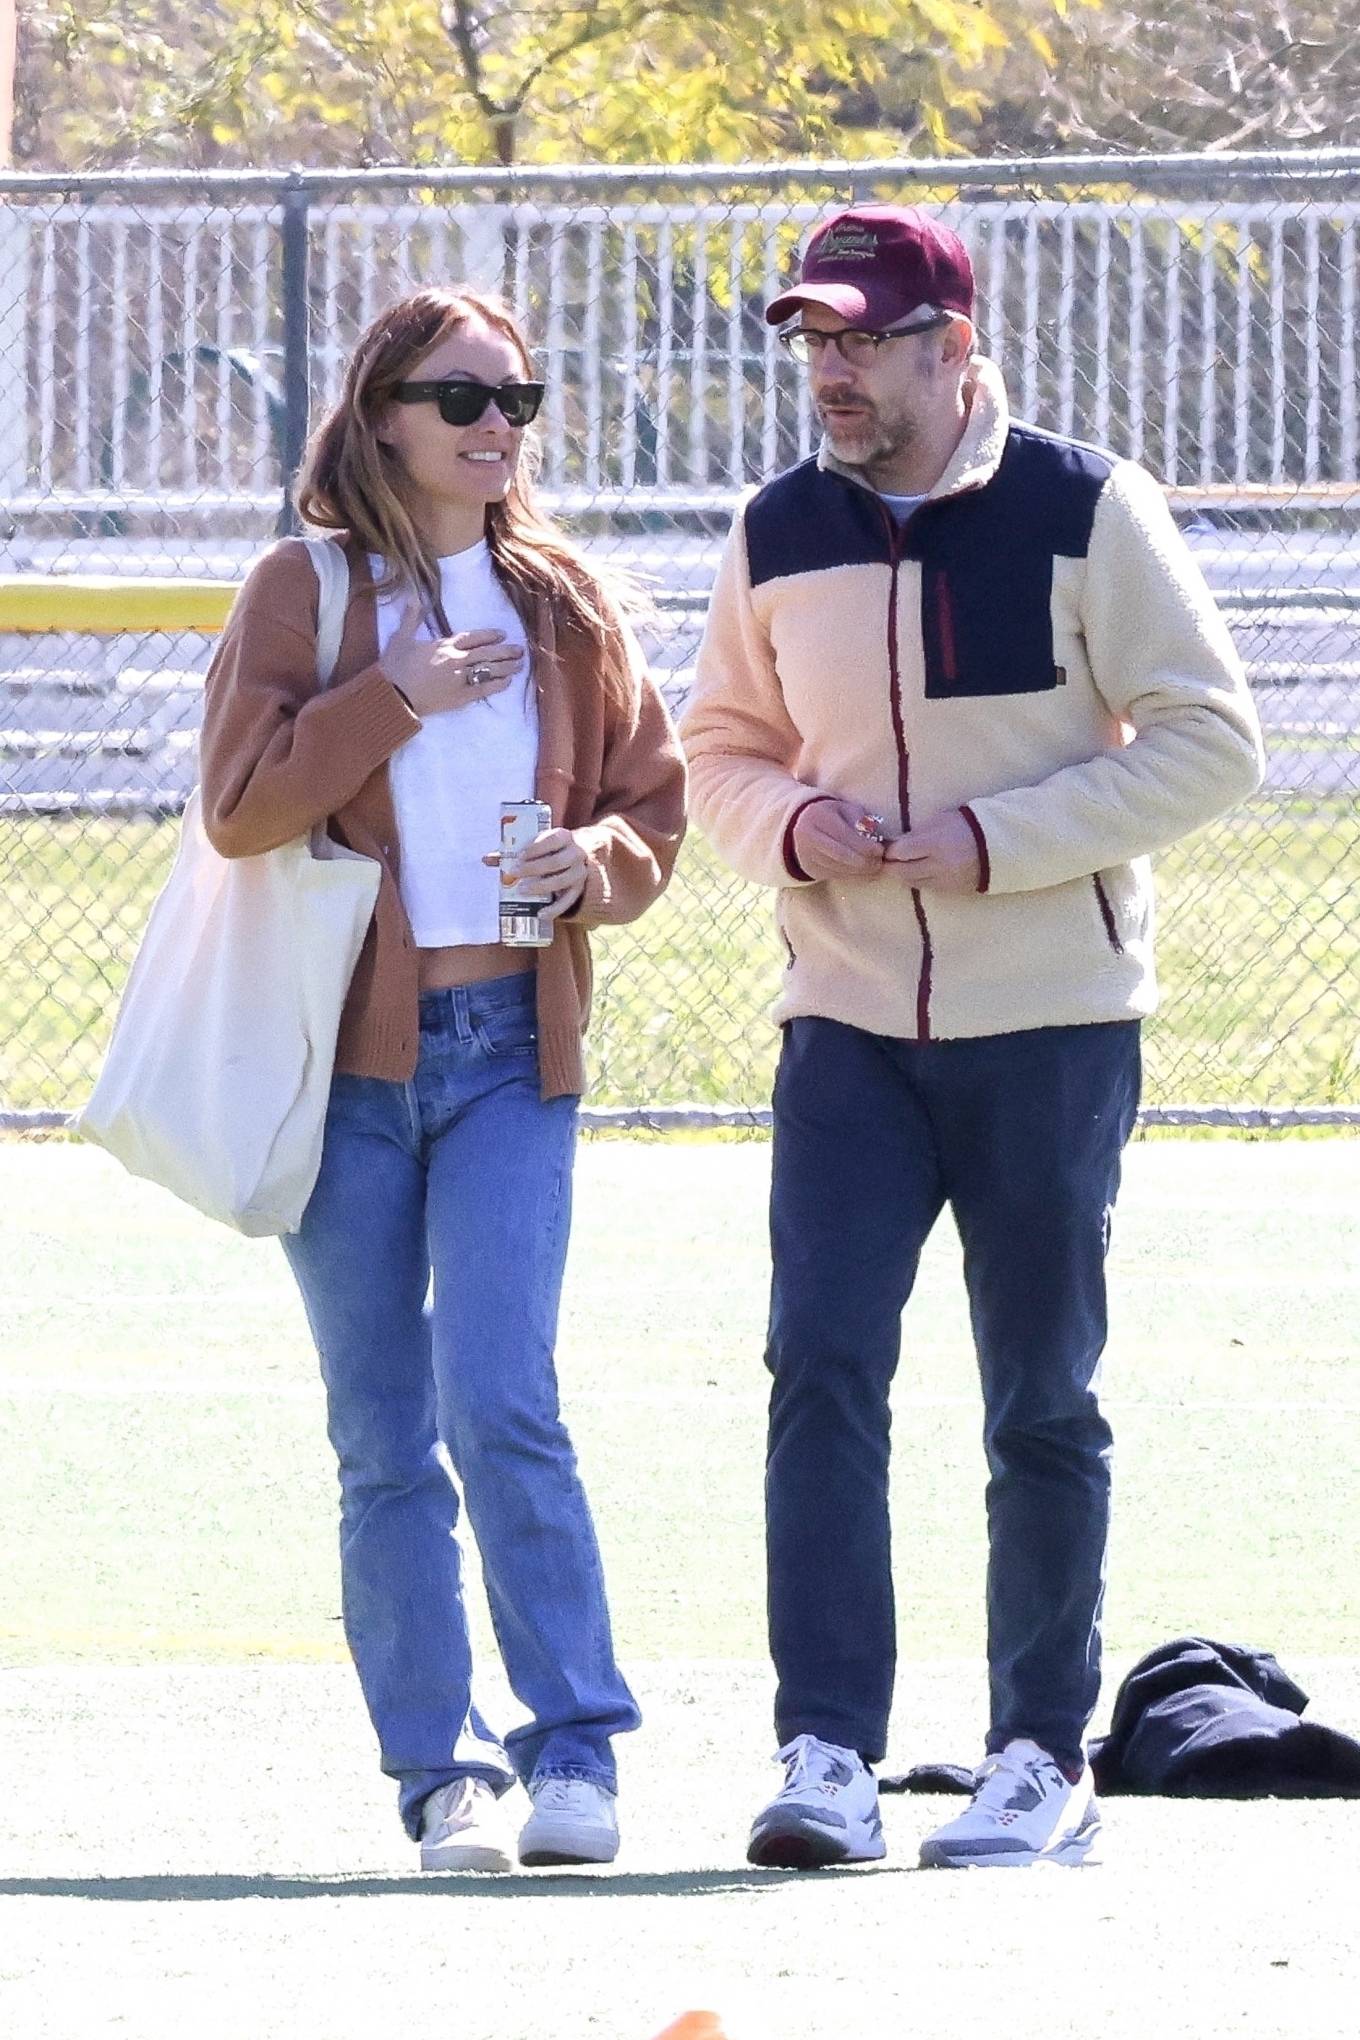 Olivia Wilde - With her ex Jason Sudeikis in Los Angeles